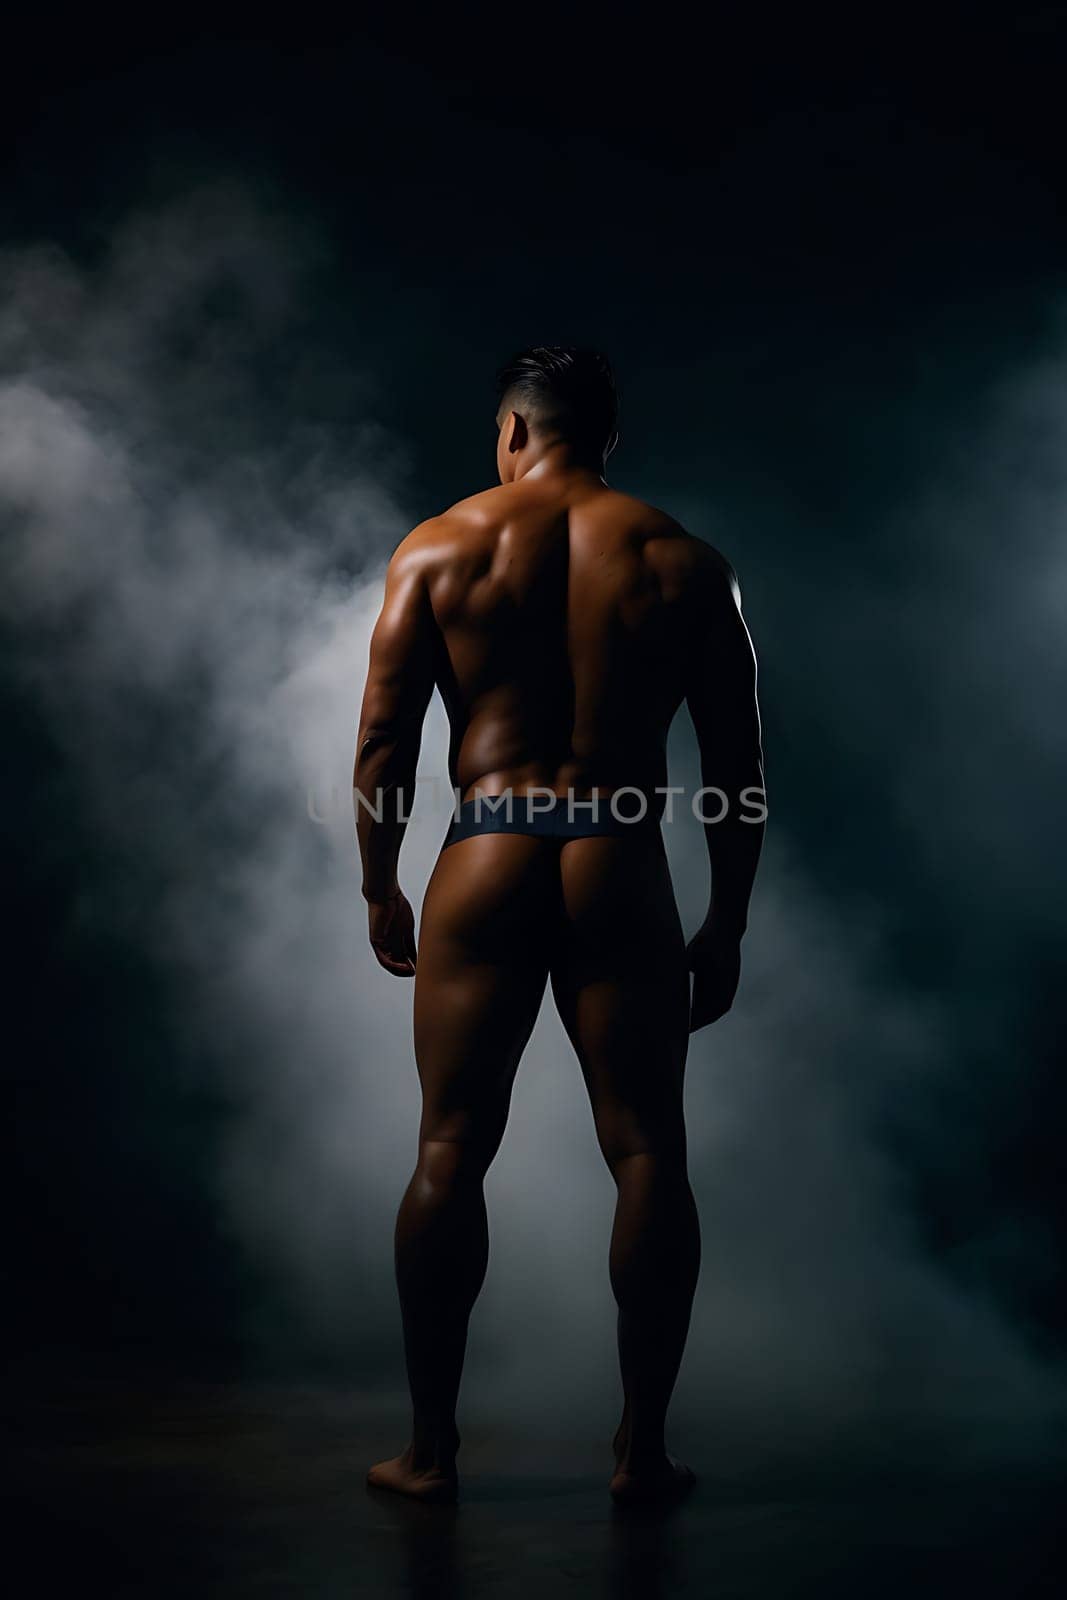 A lone figure of a man wearing only underwear standing in a dimly lit room.